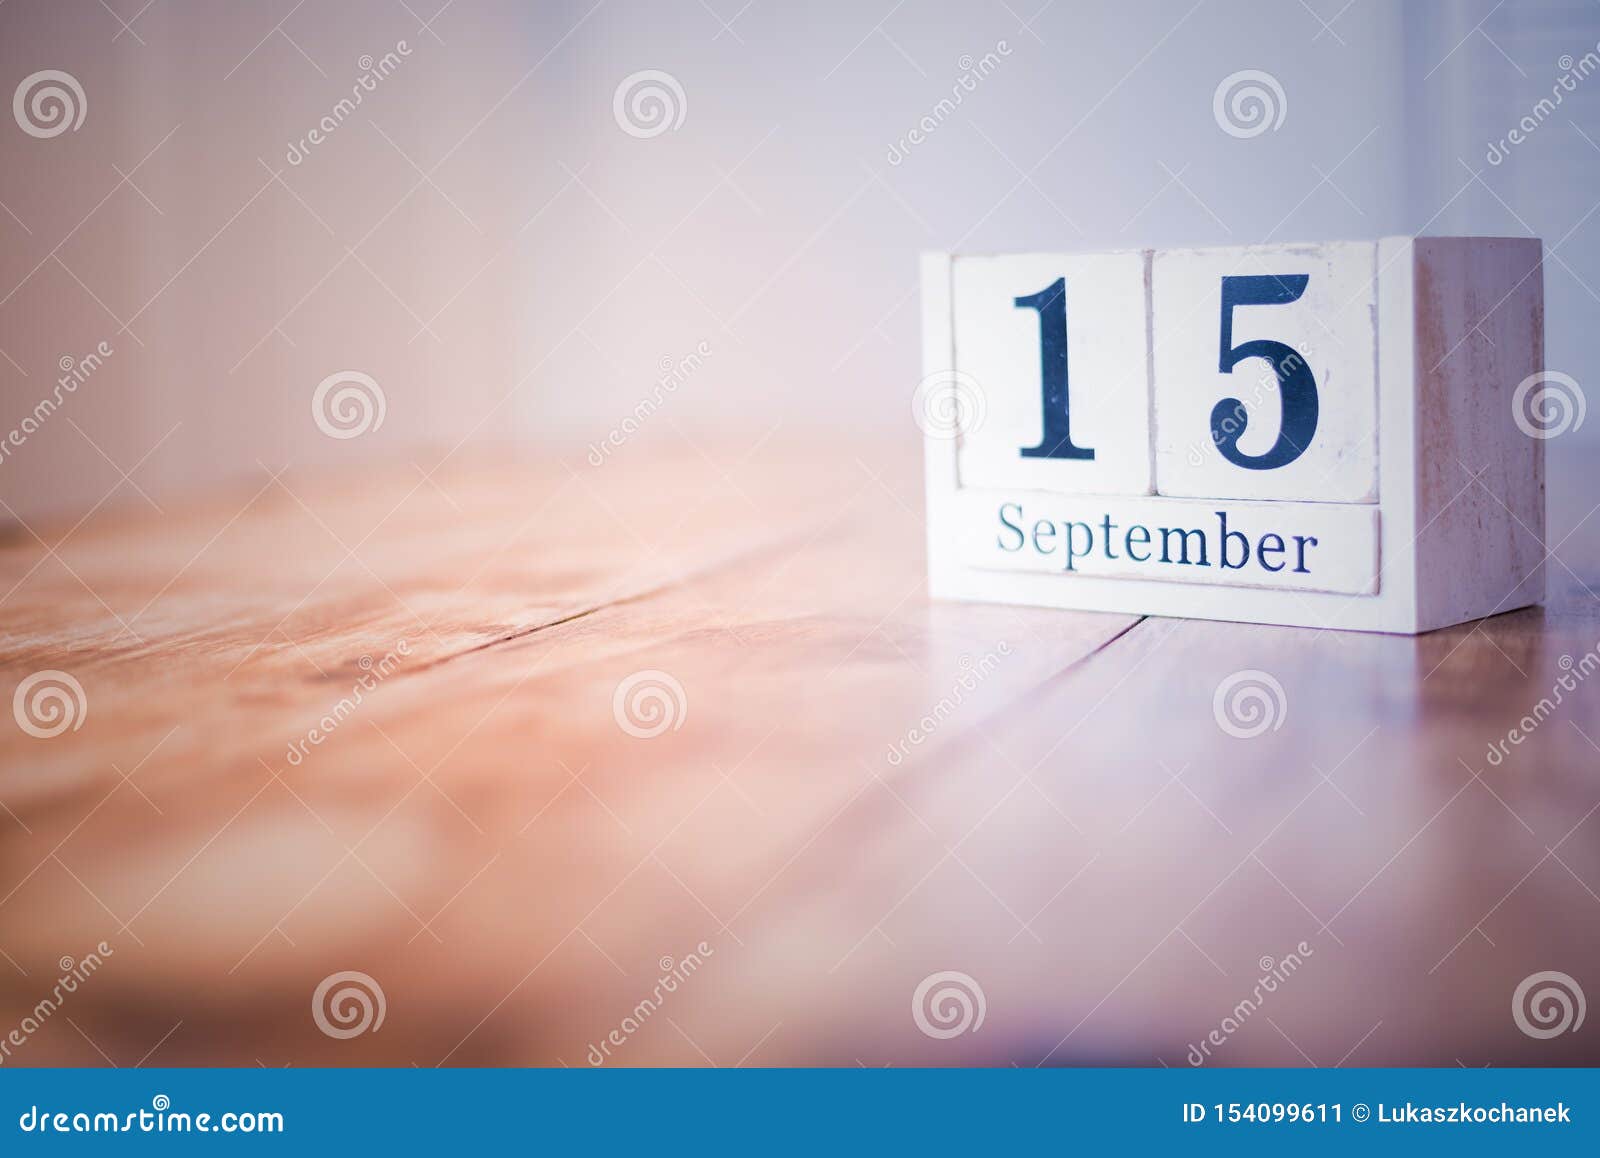 15 September 15th Of September Happy Birthday National Day Anniversary Stock Image Image Of Date Event